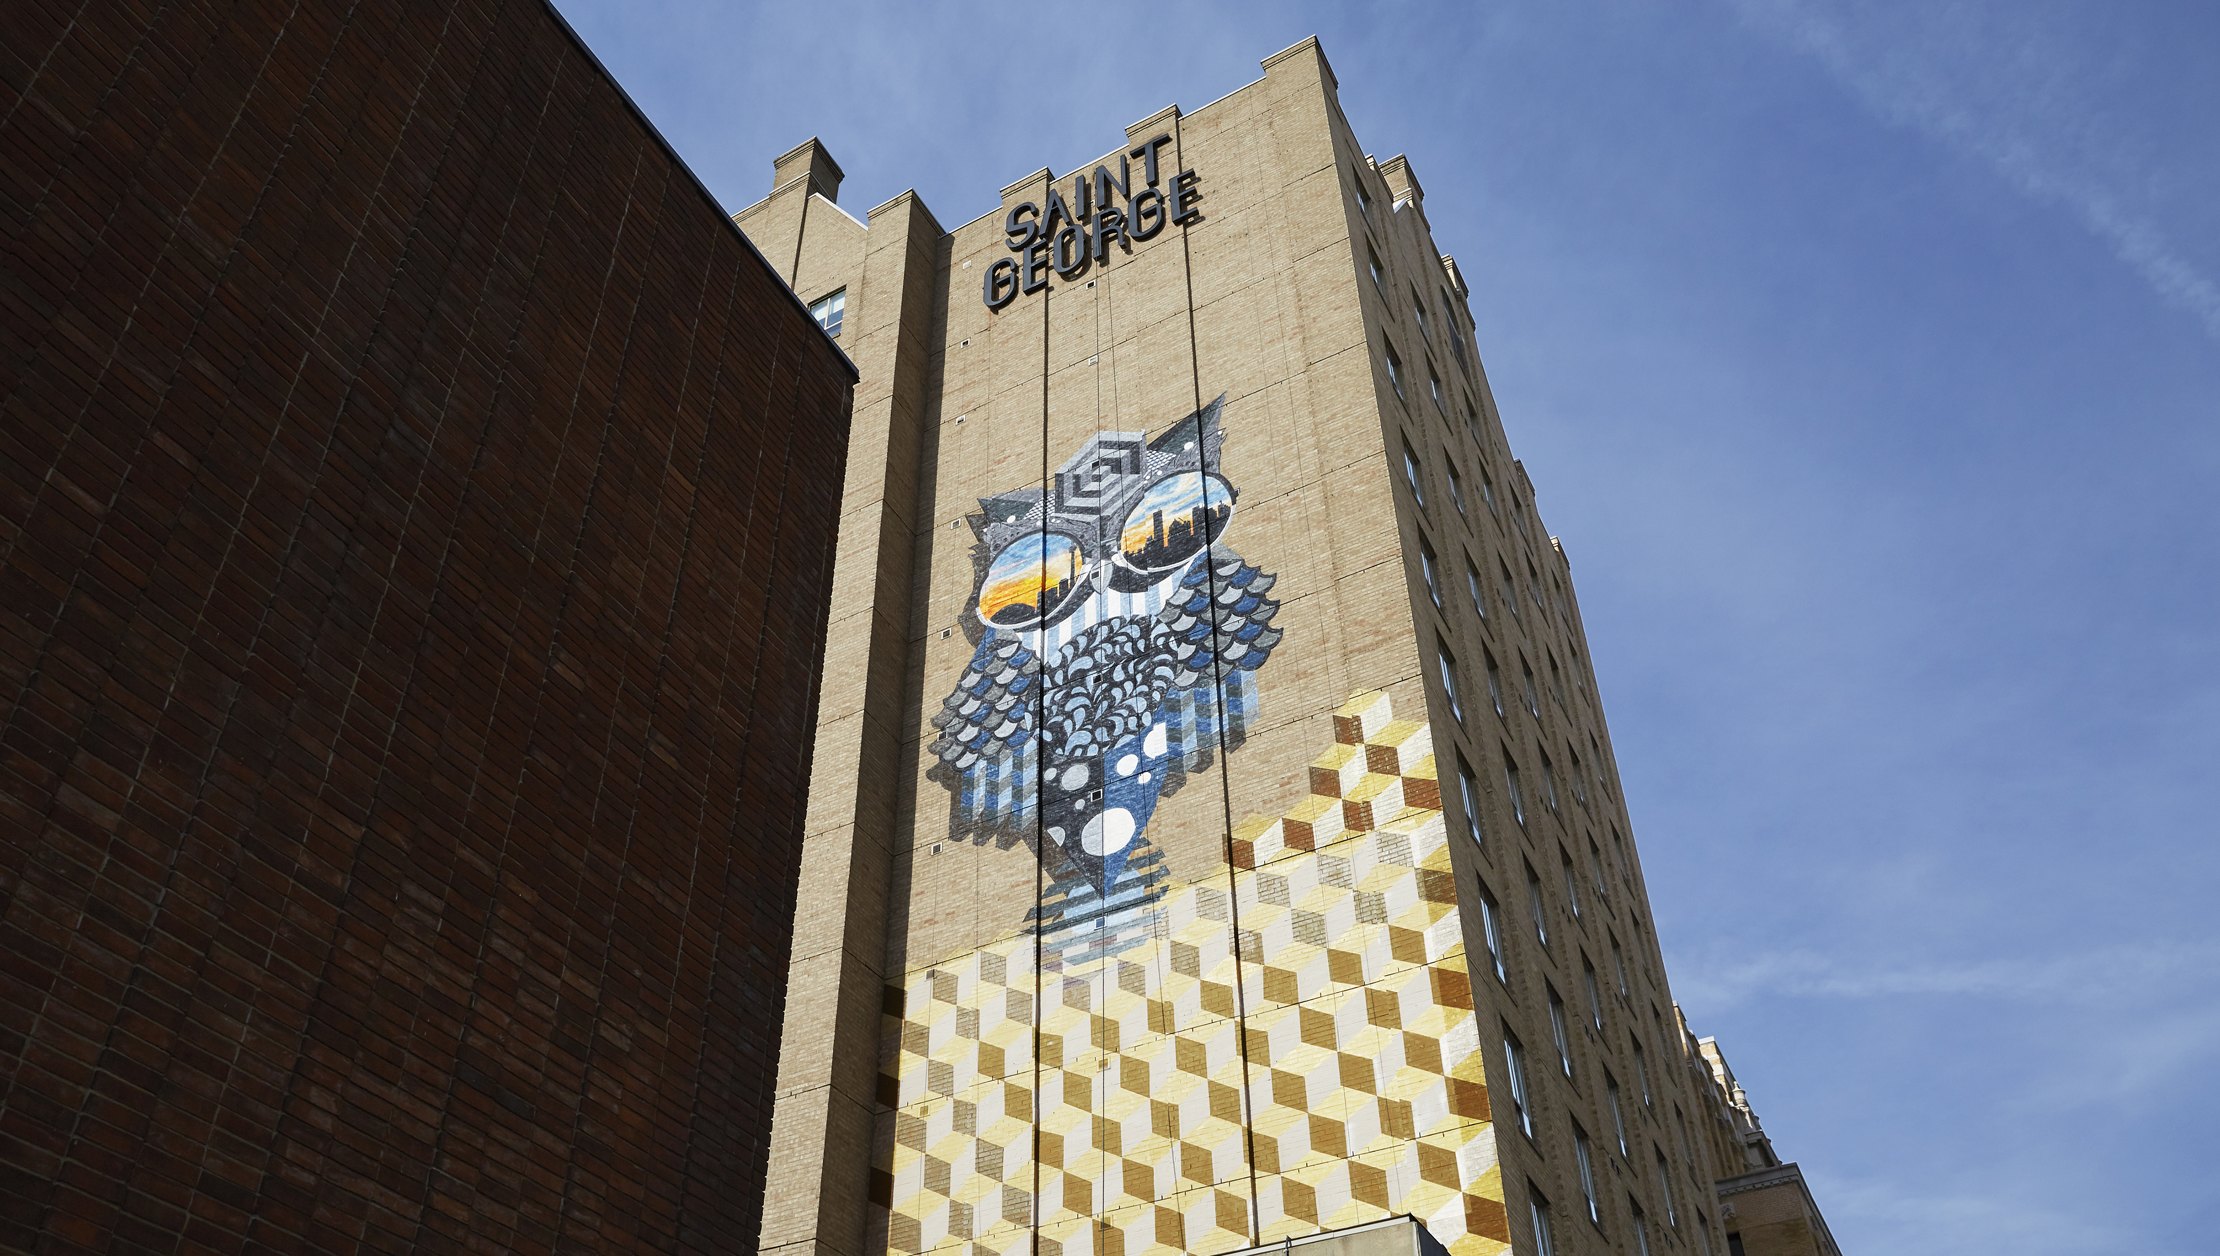 Photo of Kimpton Saint George building exterior with hand painted hour mural on wall